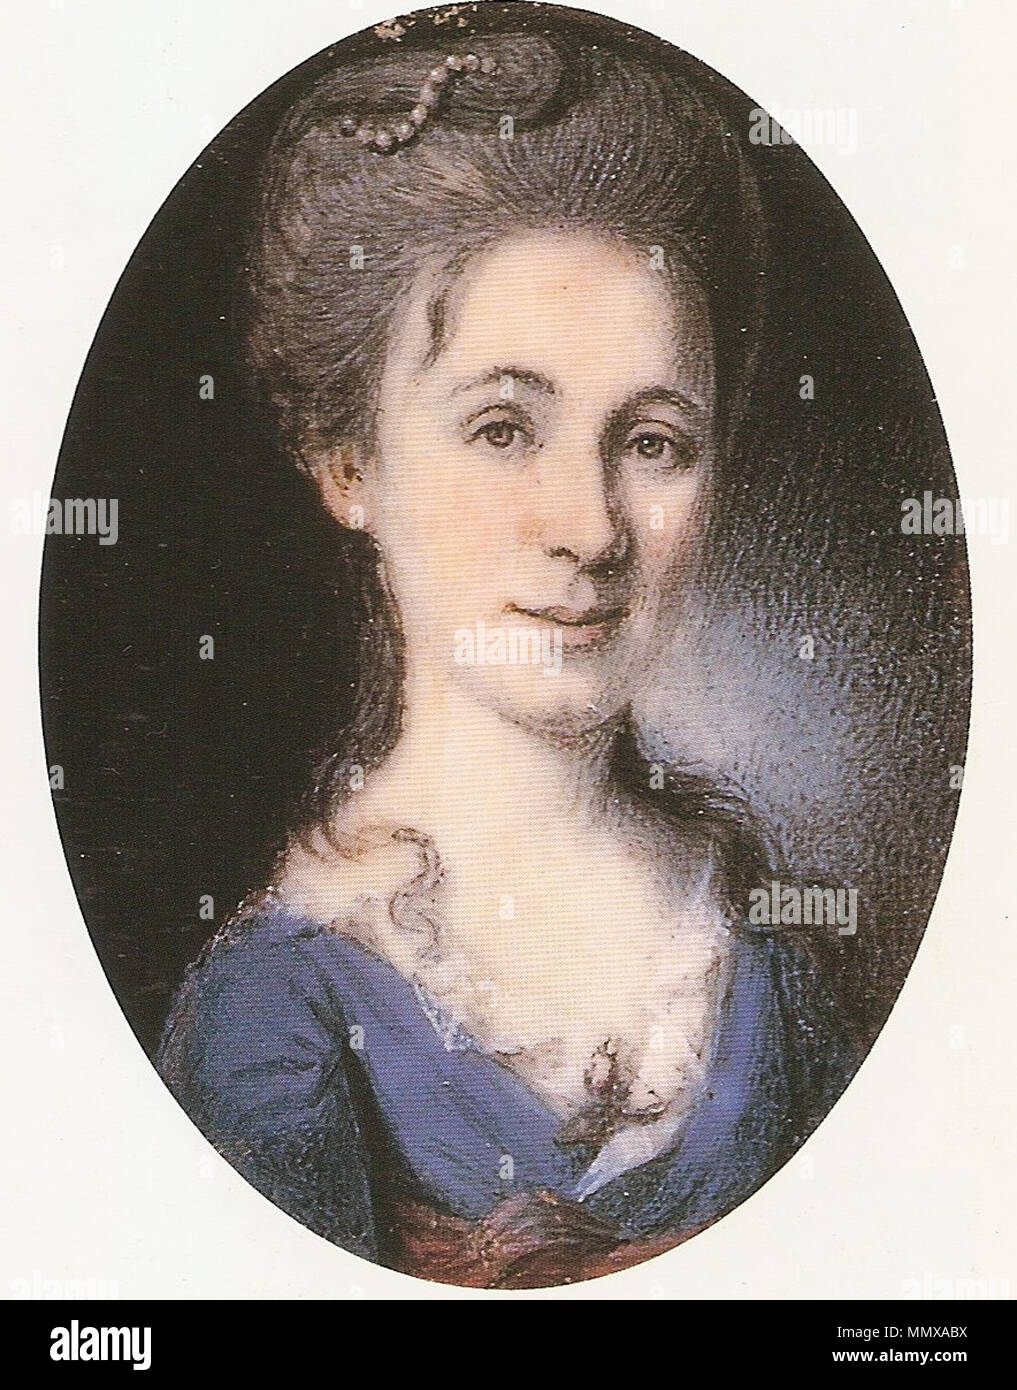 . English: Elizabeth Digby Peale , Mrs. Rubens Peale c. 1771 watercolor on ivory 5.1 x 3.1 cm private collection courtesy of Earle D. Vendekar of knightsbridge  . 29 March 2013, 14:43:39.   Charles Willson Peale  (1741–1827)     Description American portrait painter  Date of birth/death 15 April 1741 22 February 1827  Location of birth/death St. Paul's Parish, Maryland Philadelphia  Work location Deutsch: Nordamerikanische Ostküste English: East coast of North America  Authority control  : Q454945 VIAF:?72190360 ISNI:?0000 0000 8262 3463 ULAN:?500017914 LCCN:?n80025860 NLA:?35413732 WorldCat E Stock Photo